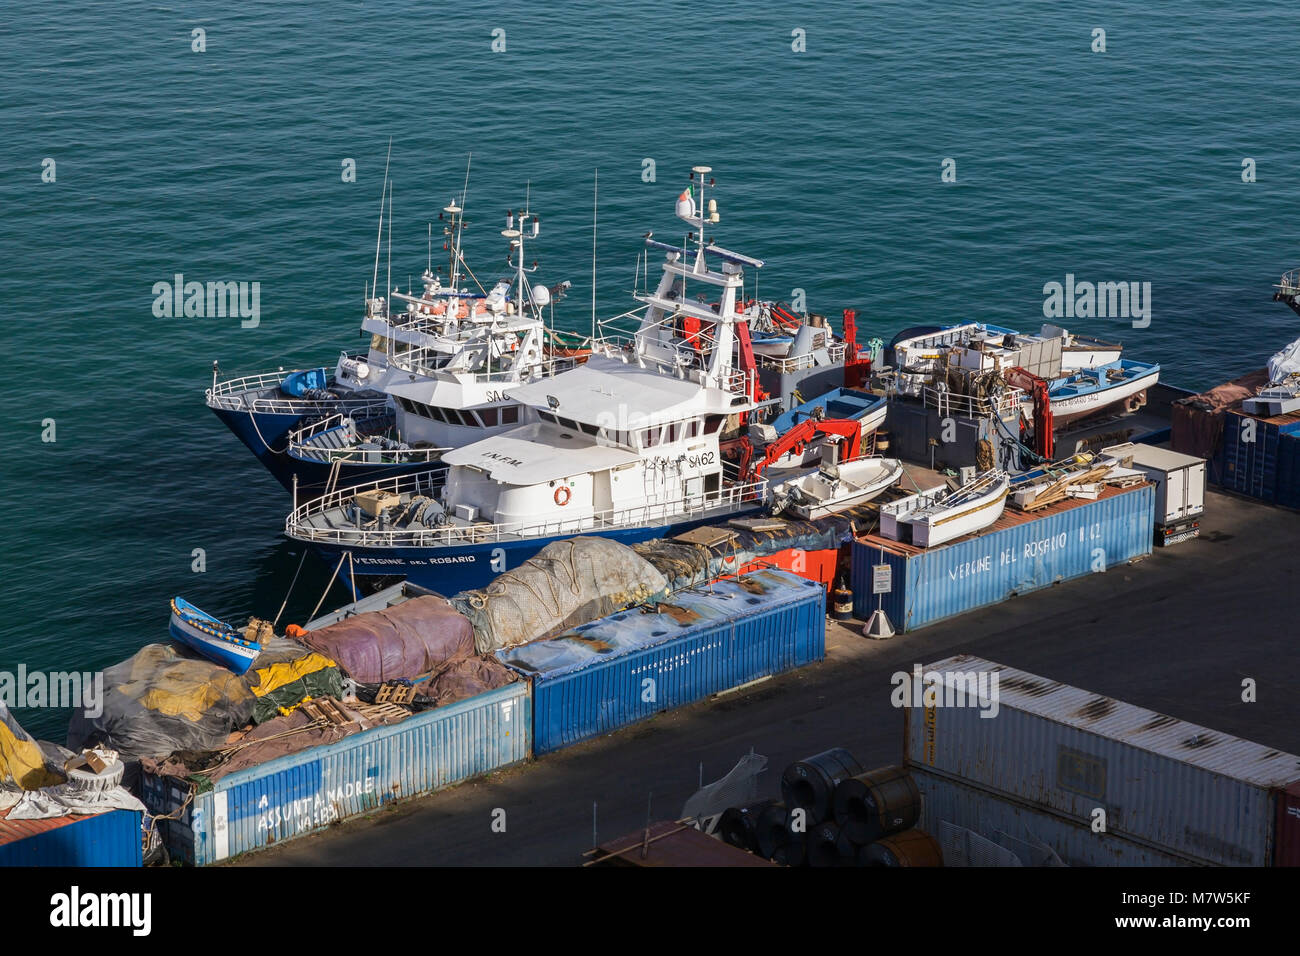 Blue shipping containers and fishing boats at dock in the port of Salerno, Italy, Europe. Stock Photo